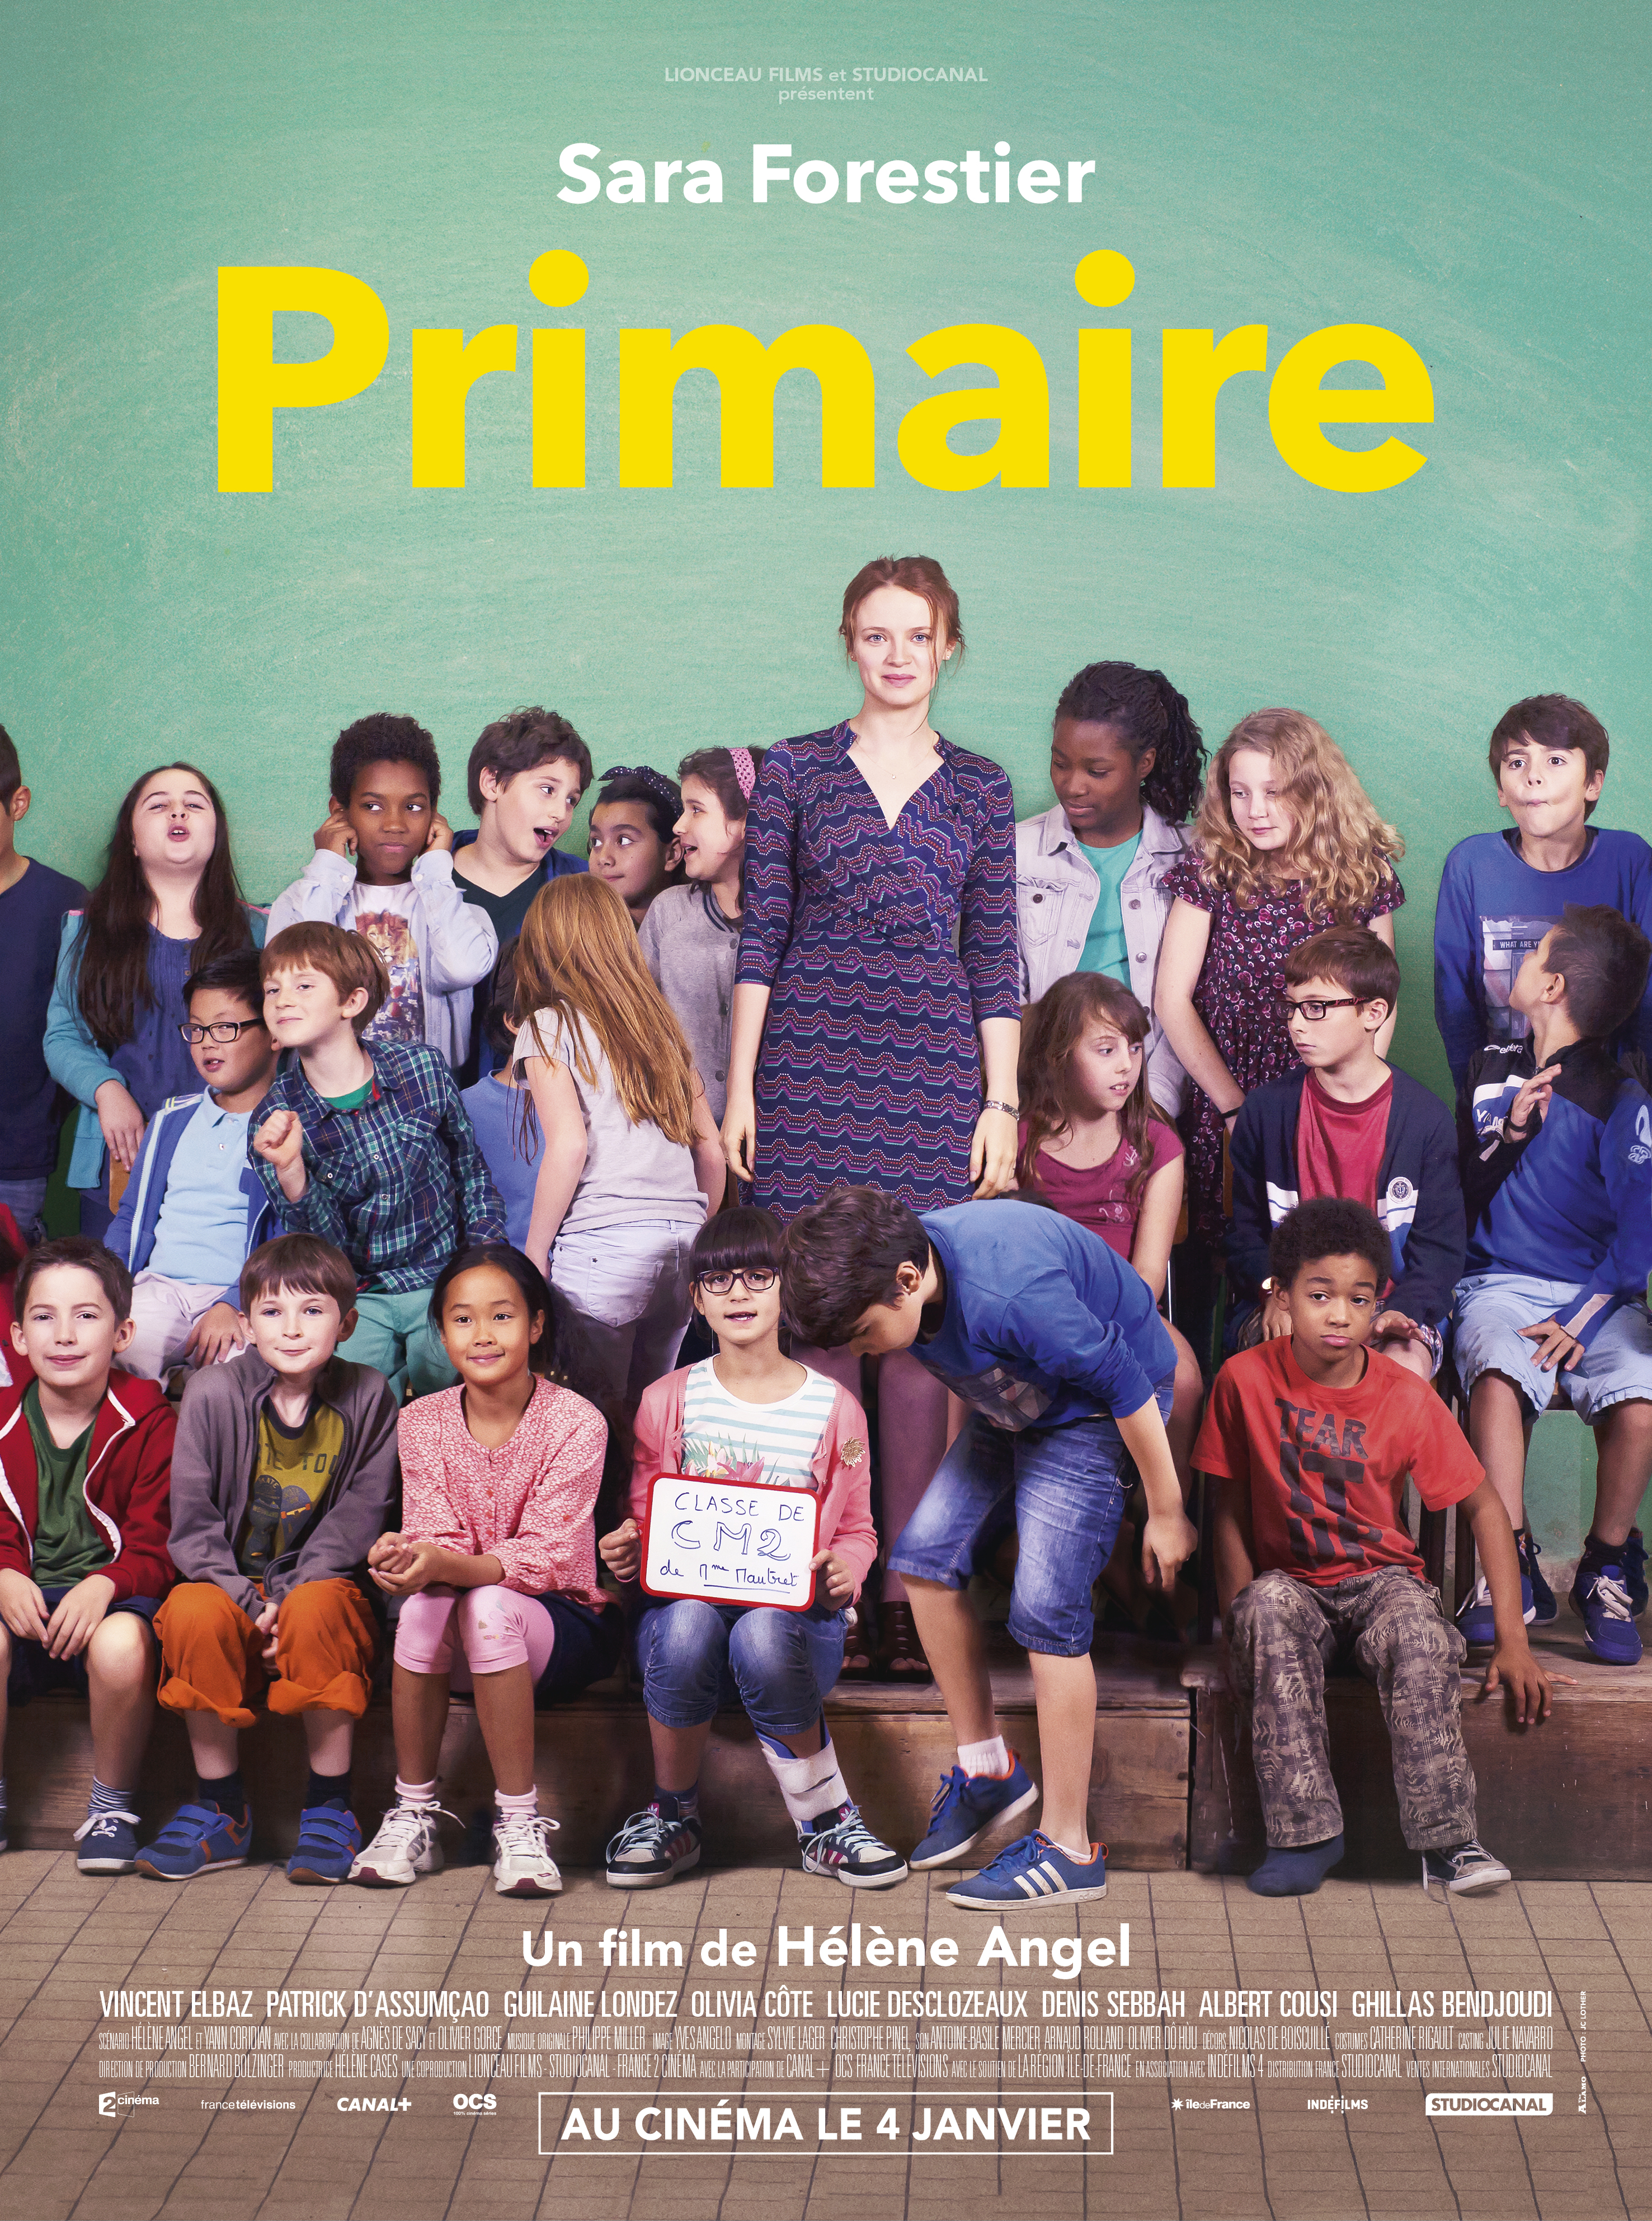 Primaire (2016) with English Subtitles on DVD on DVD